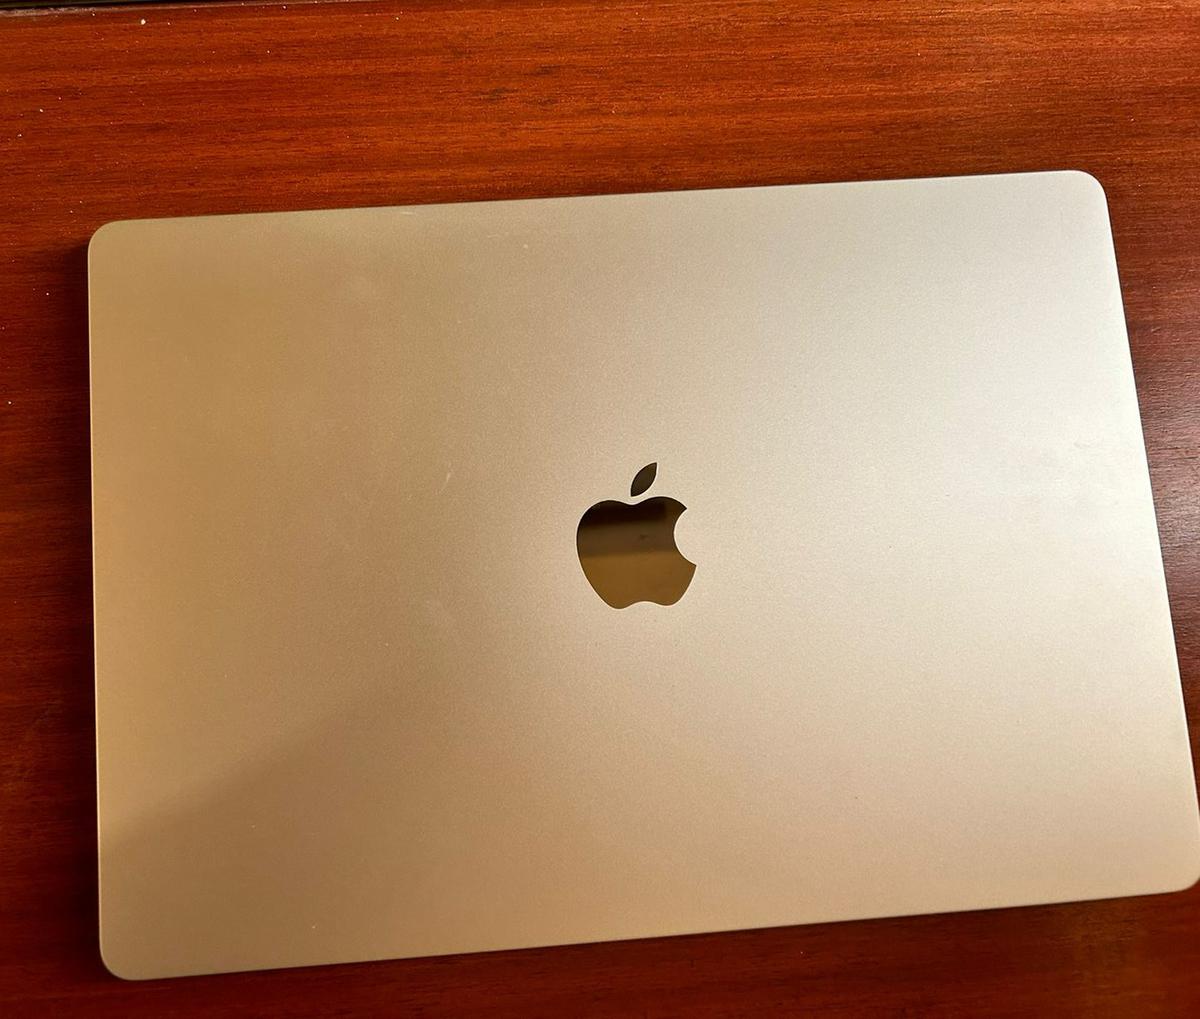 The MacBook Air 15-inch is a highly functional and well-tuned device.